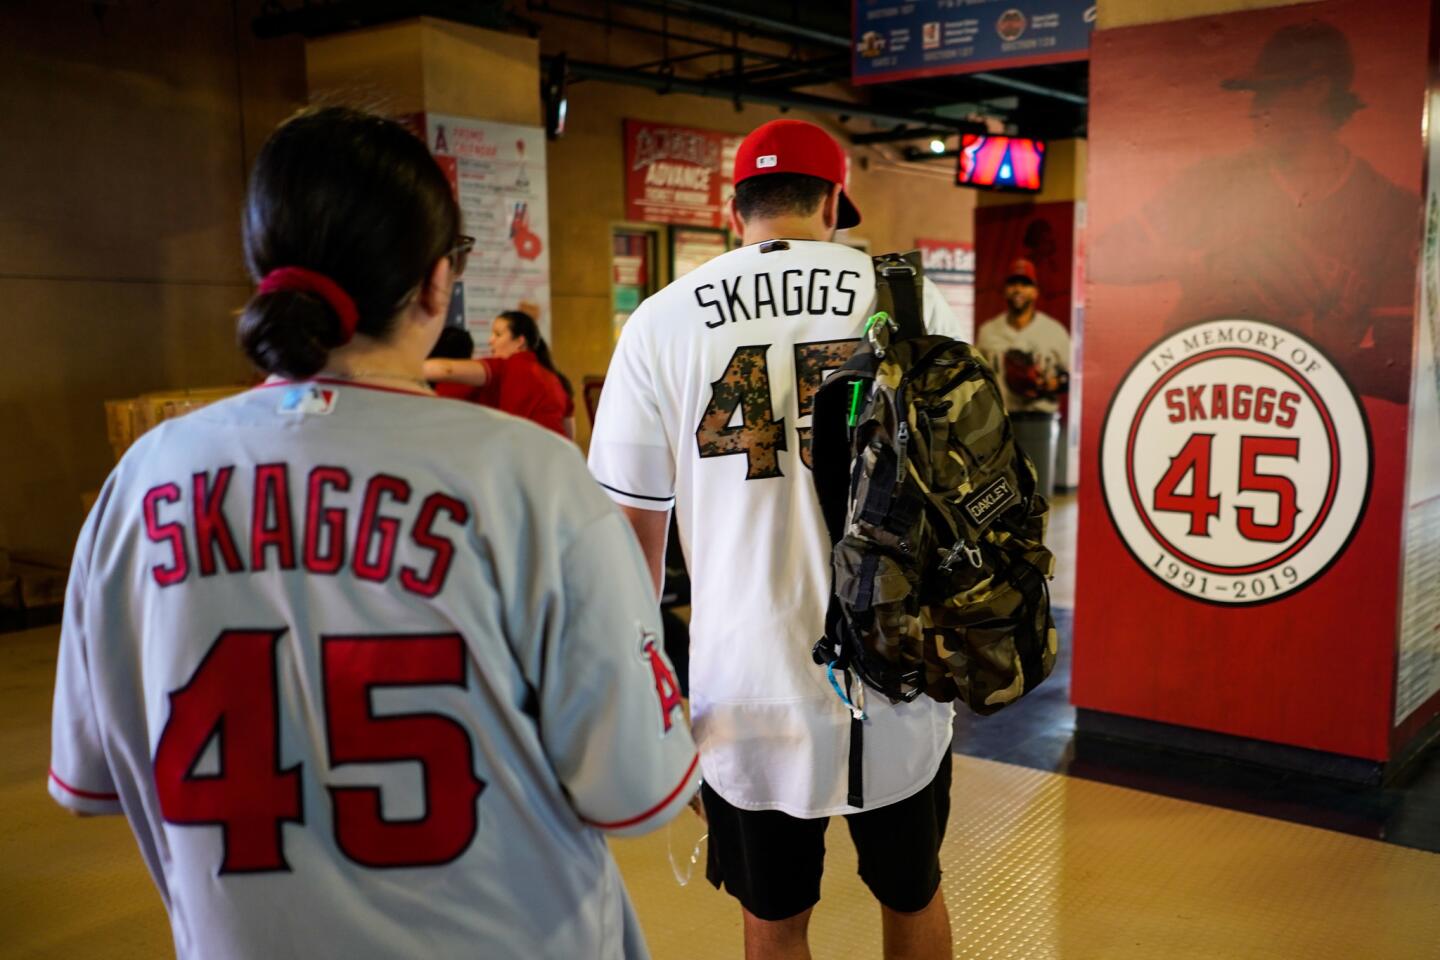 Autopsy on Angels pitcher Tyler Skaggs: Fentanyl, oxycodone, alcohol led to  death by choking on vomit